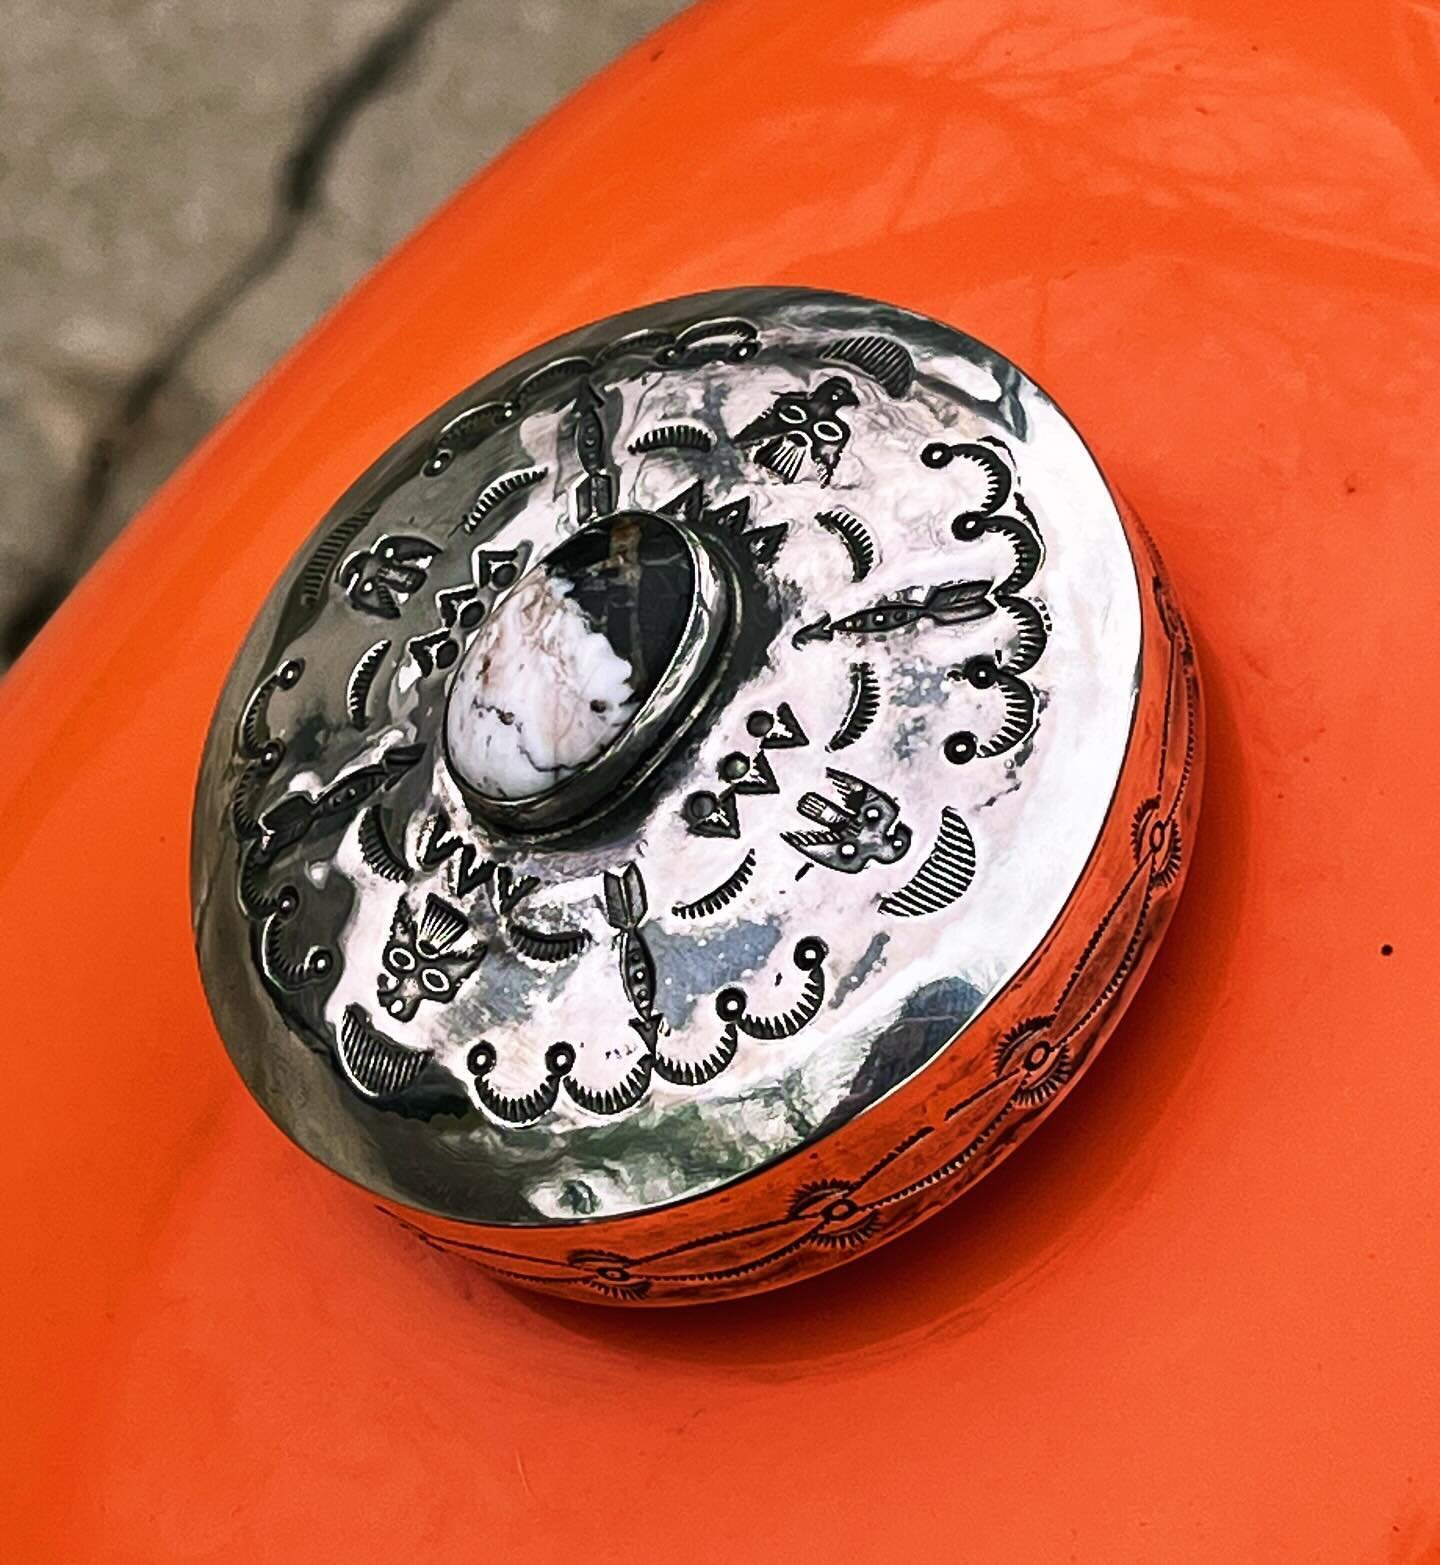 The weather in Texas has been a bit wacky, but we put some miles on this custom white buffalo gas cap. Y&rsquo;all been riding? Who needs a sterling silver &amp; turquoise gas cap this season?